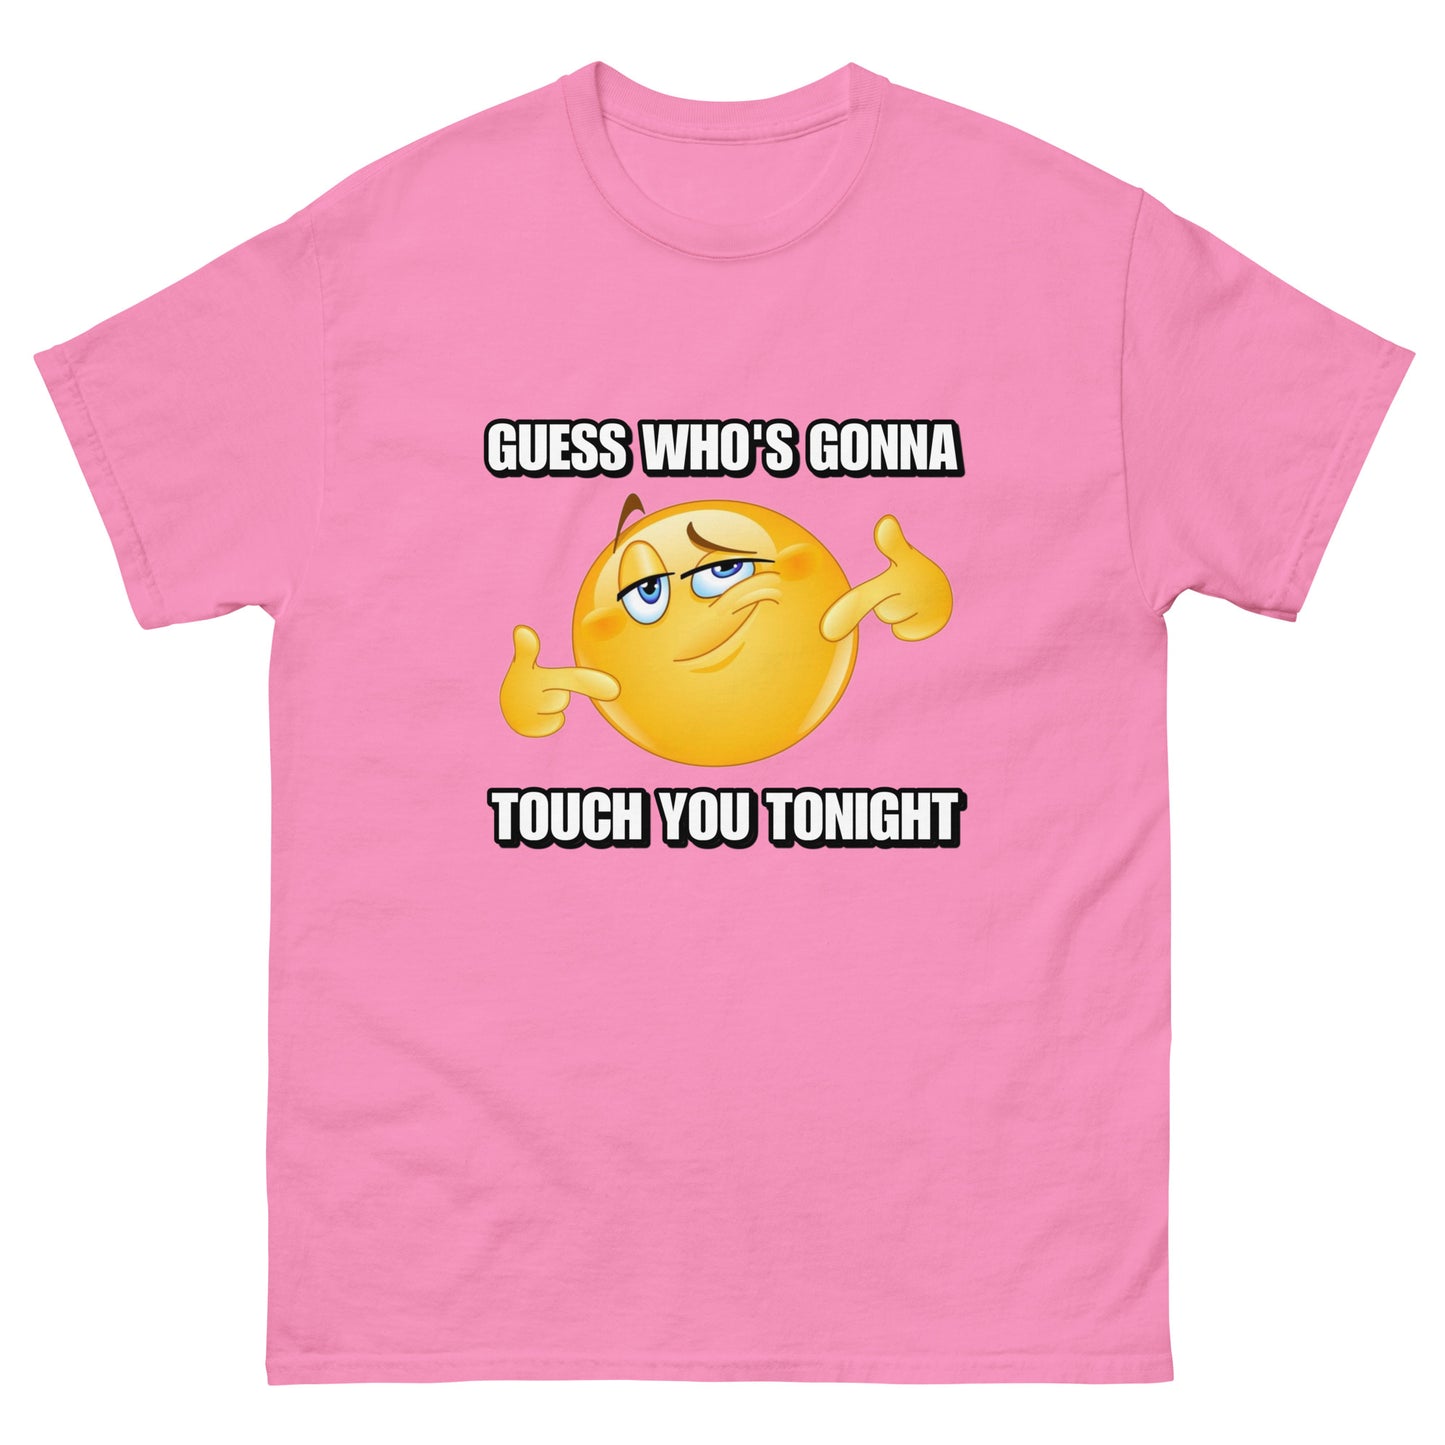 Guess who’s gonna touch you Cringey Tee